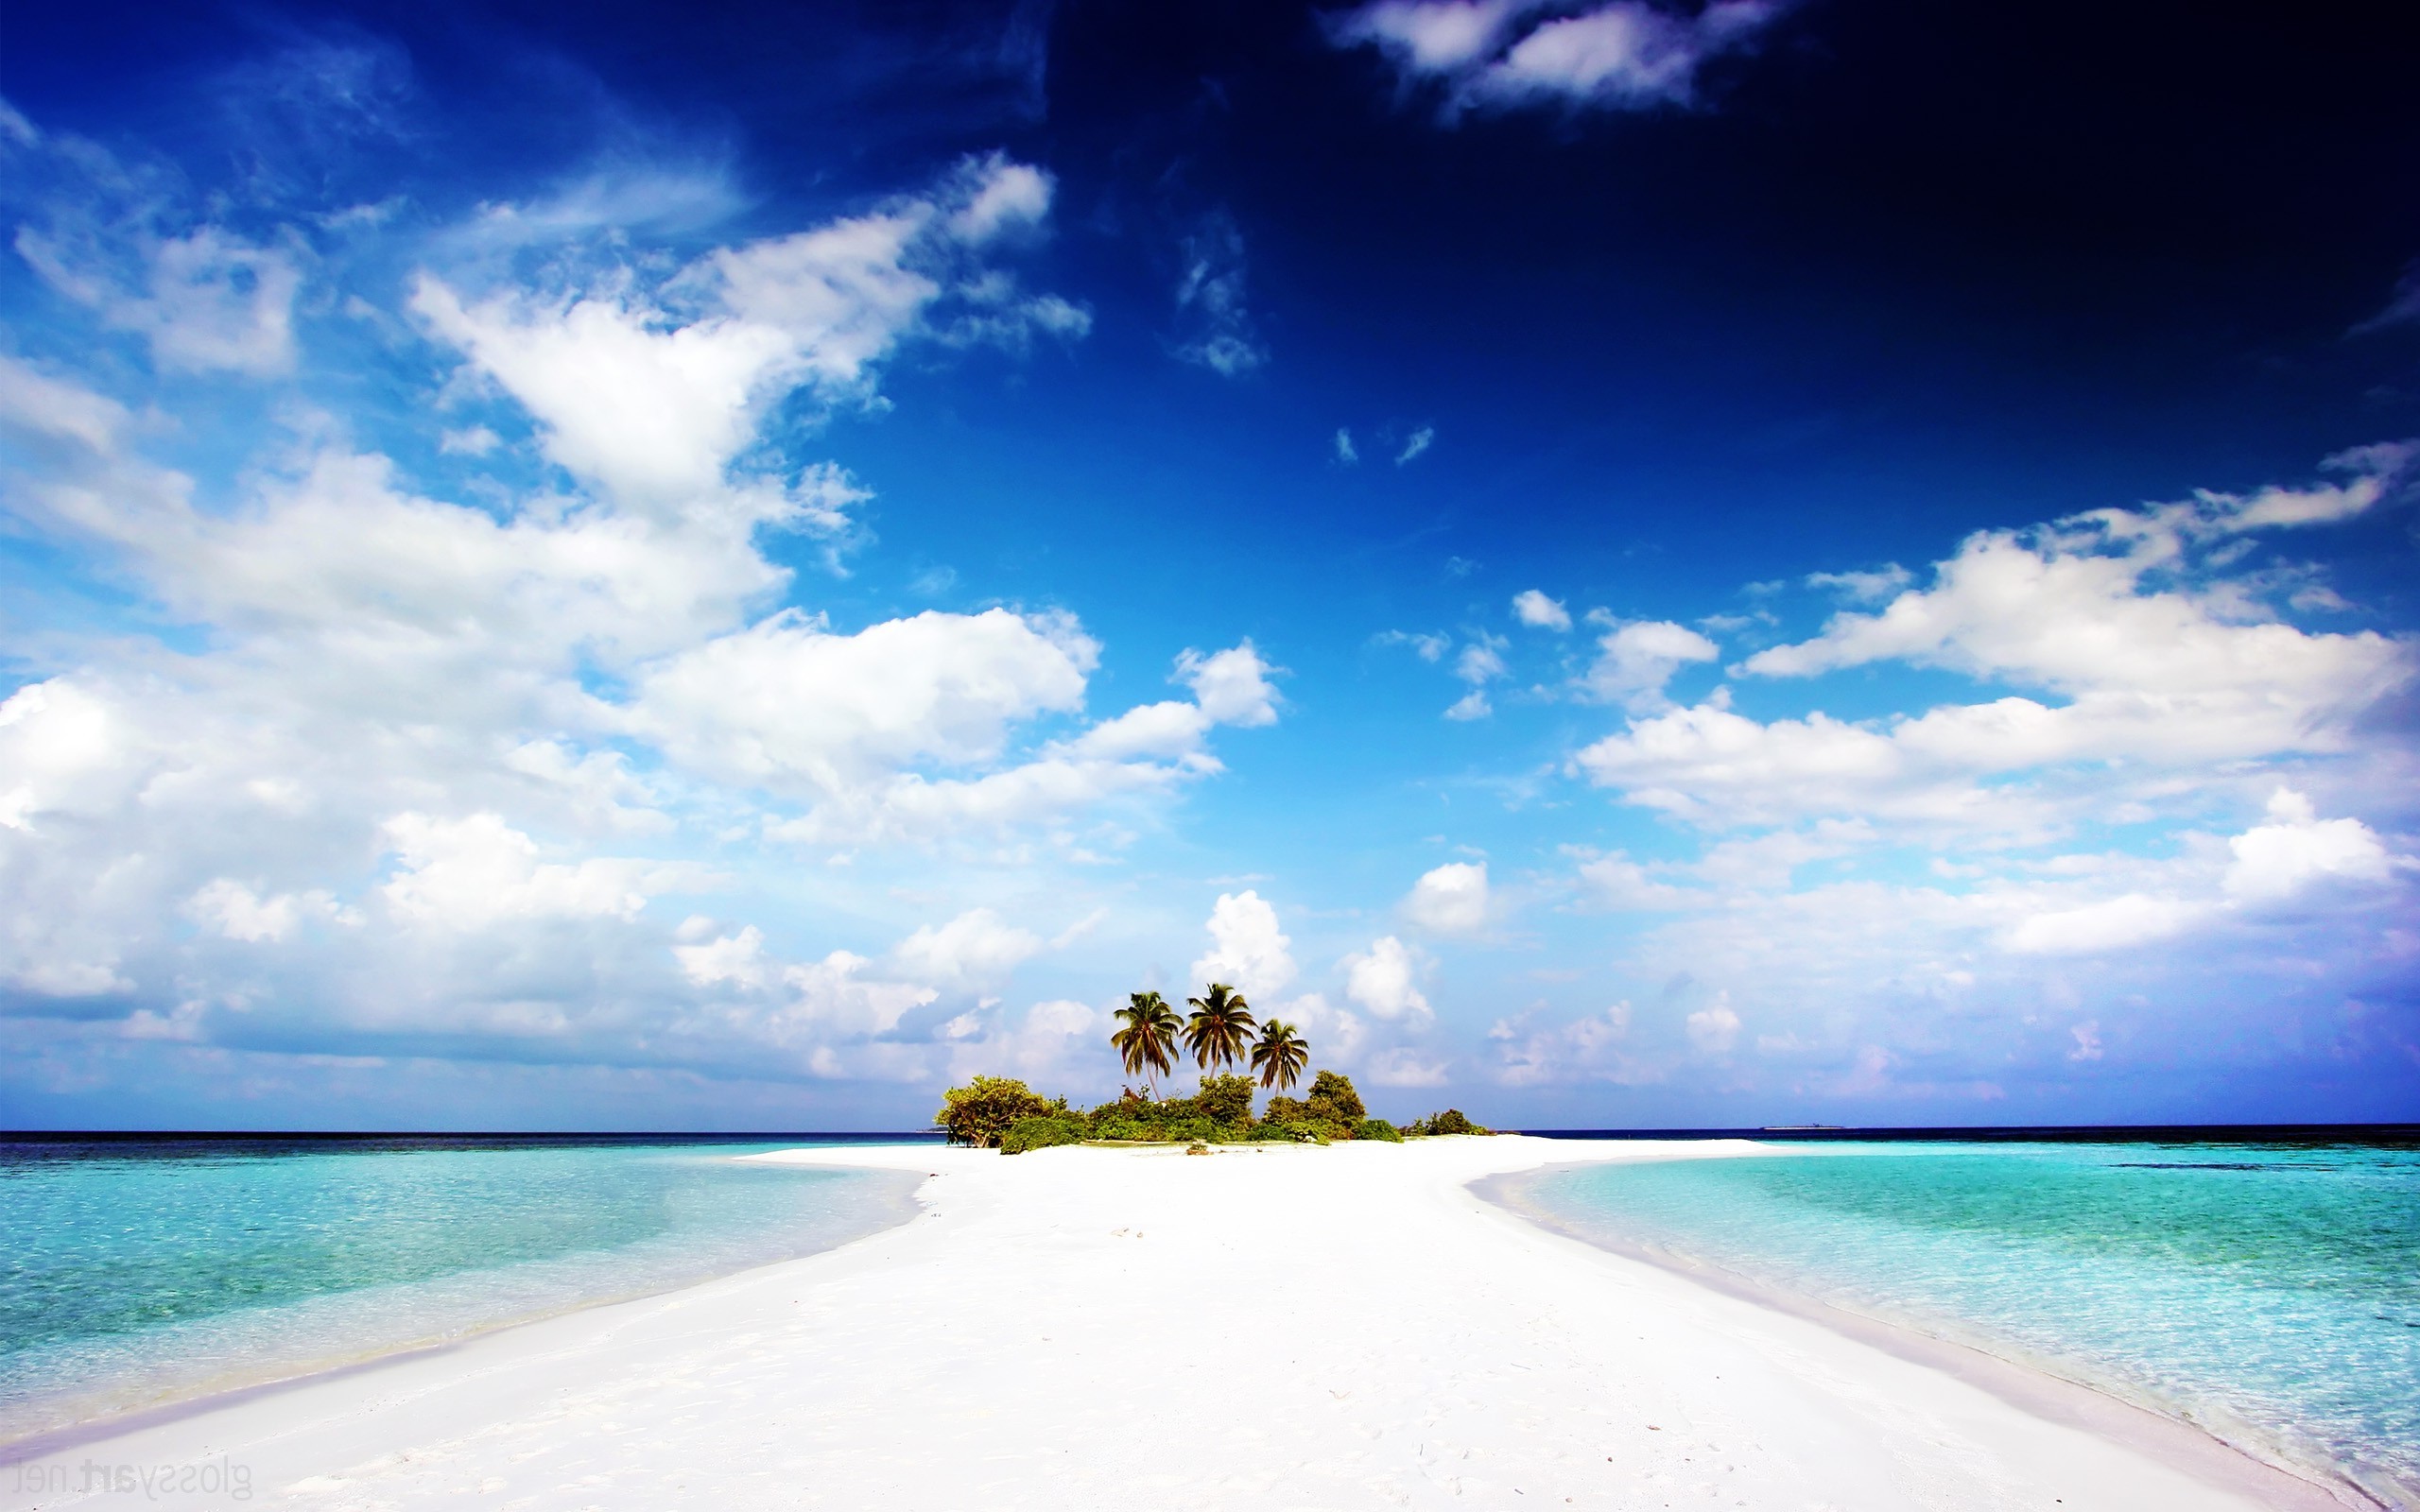 landscape, Photography, Nature, Water, Sea, Tropical, Tropical Island, Clouds, Sand, Beach ...